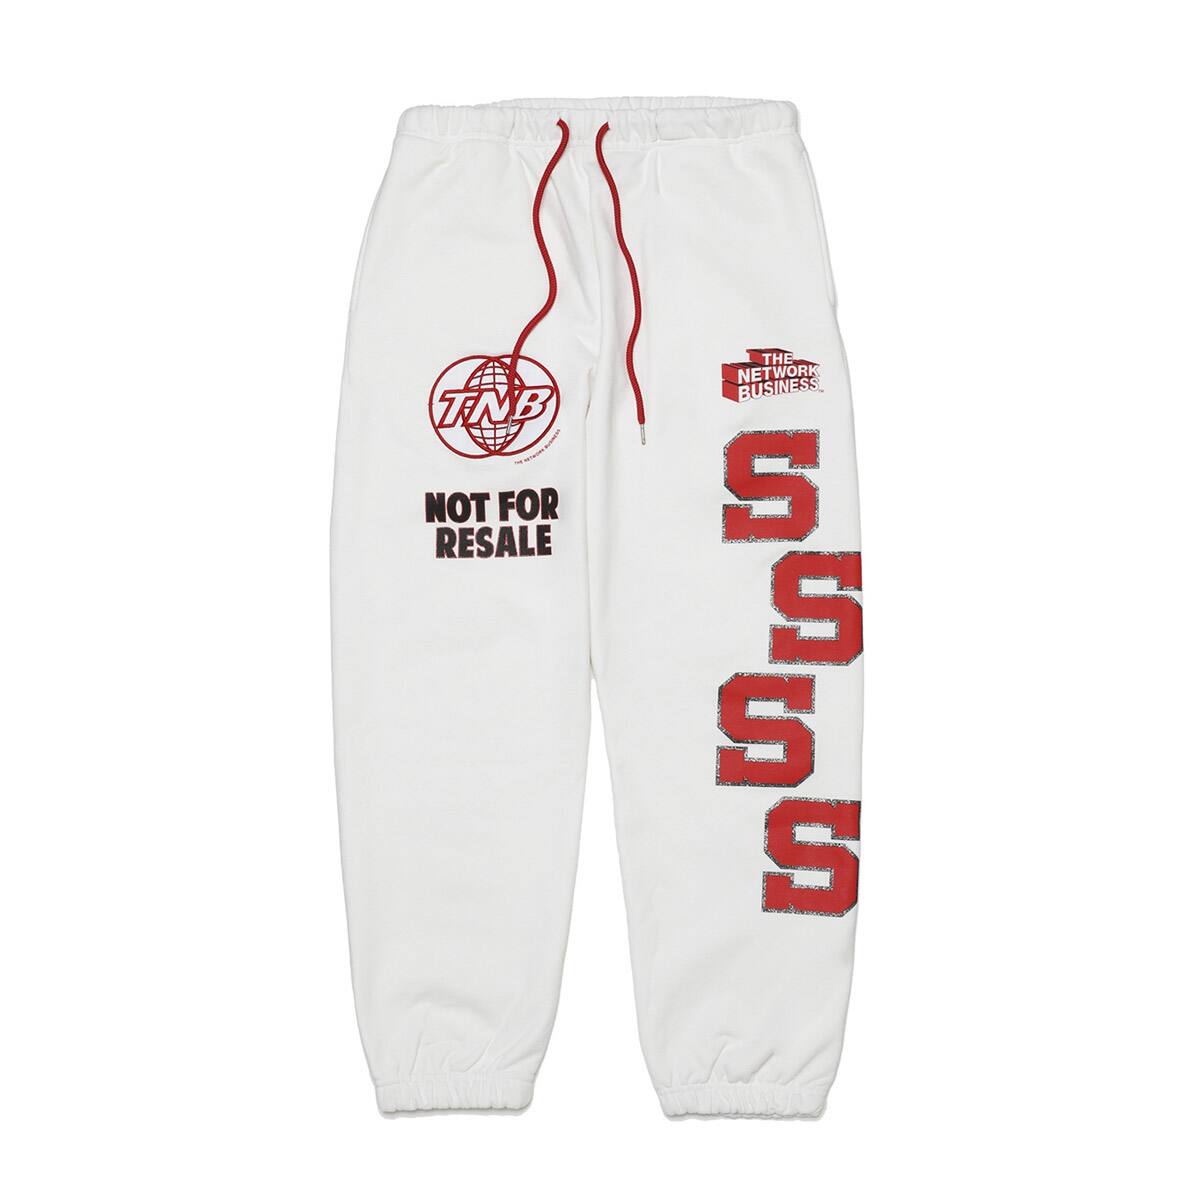 THE NETWORK BUSINESS Sweat Pants Carmine WHITE 21SP-S_photo_large